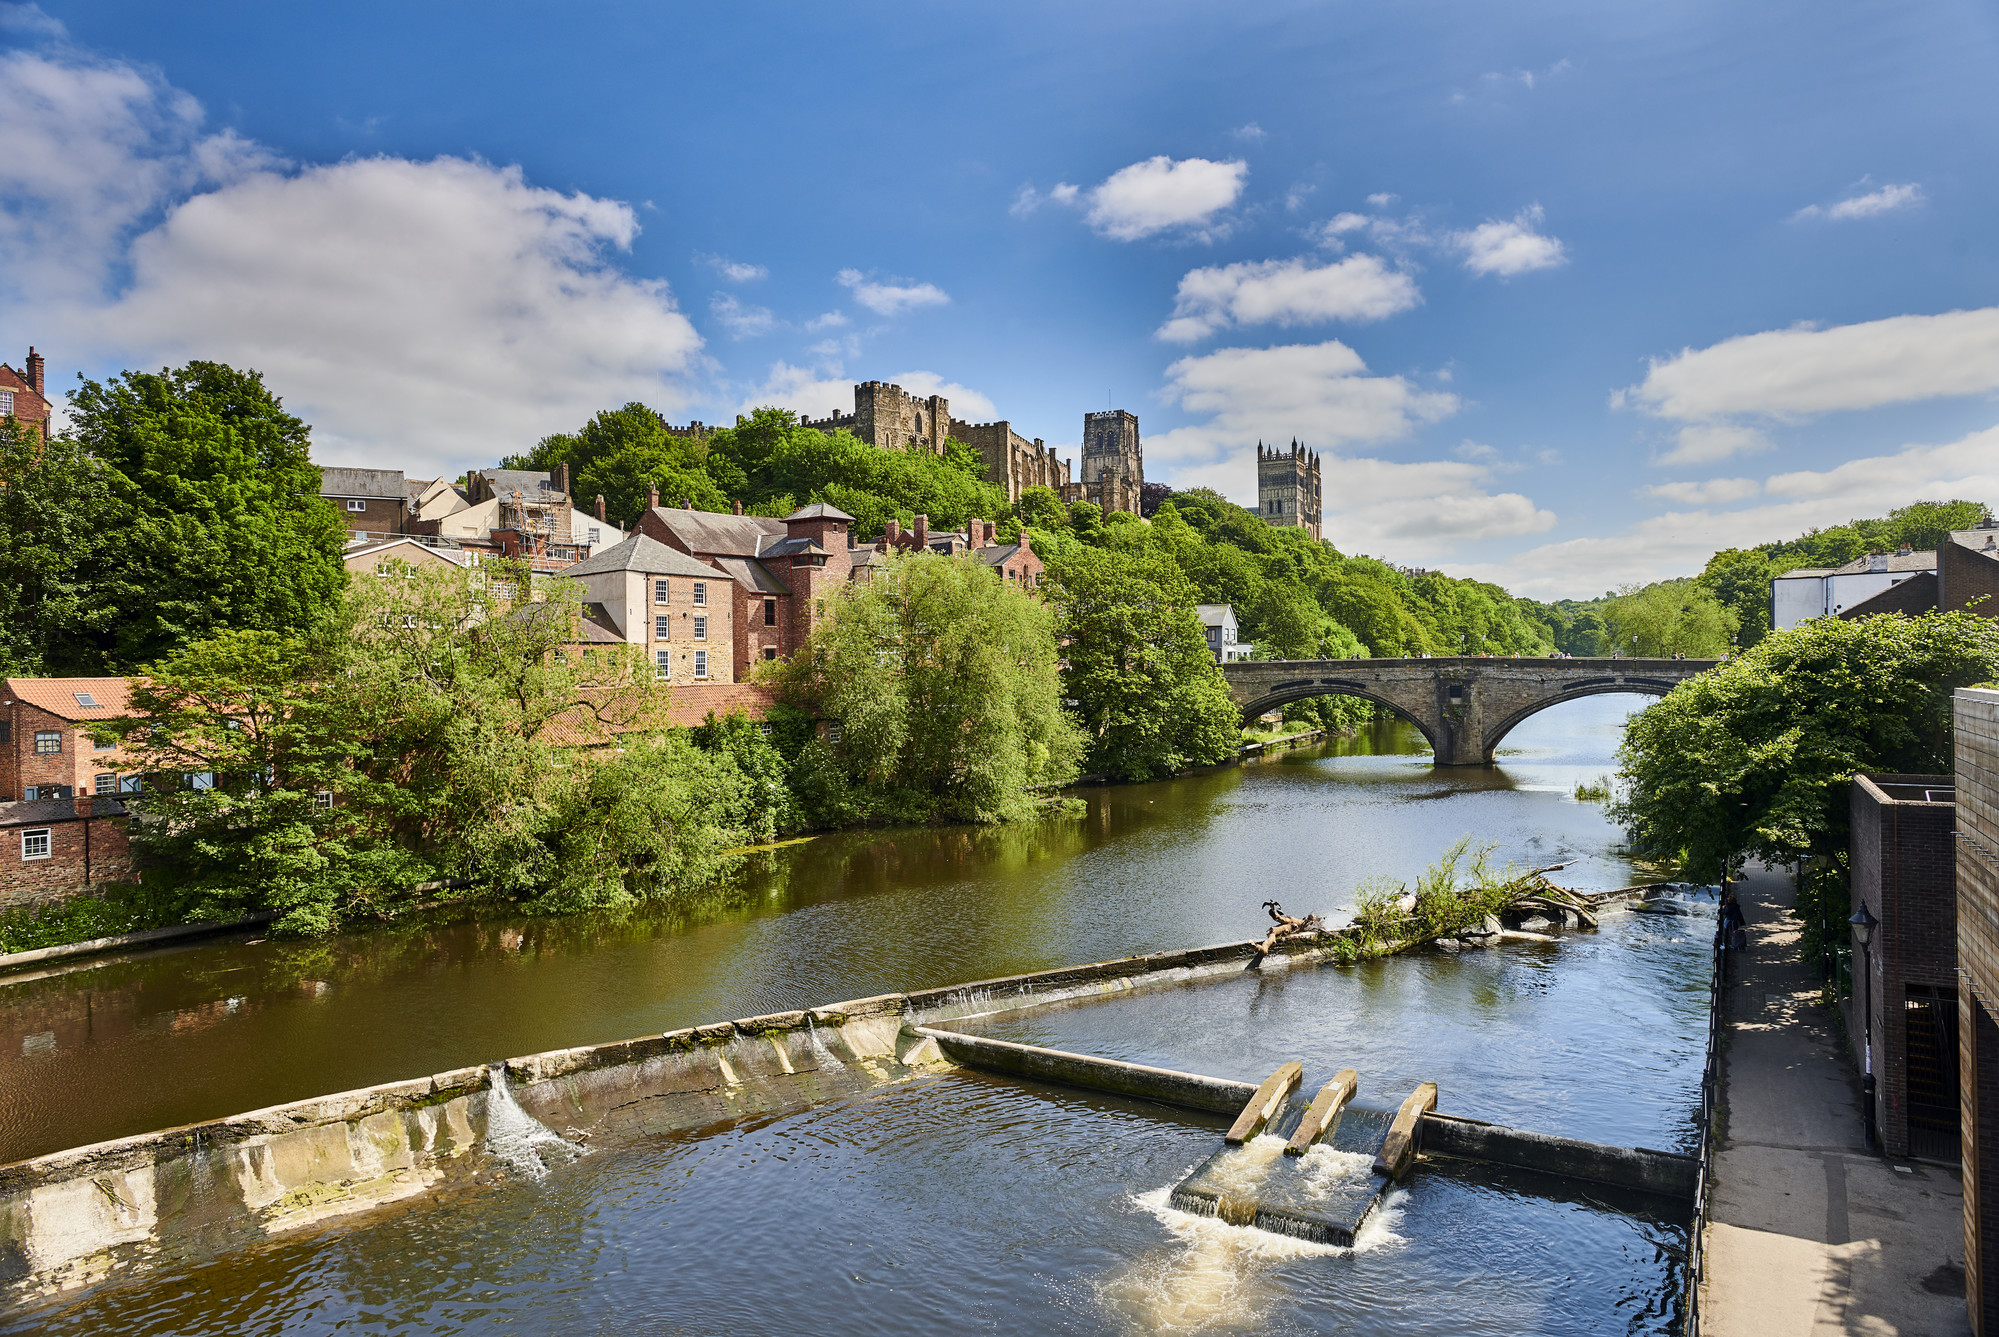 View of Durham Castle, Durham Cathedral and Framwellgate Bridge across the river